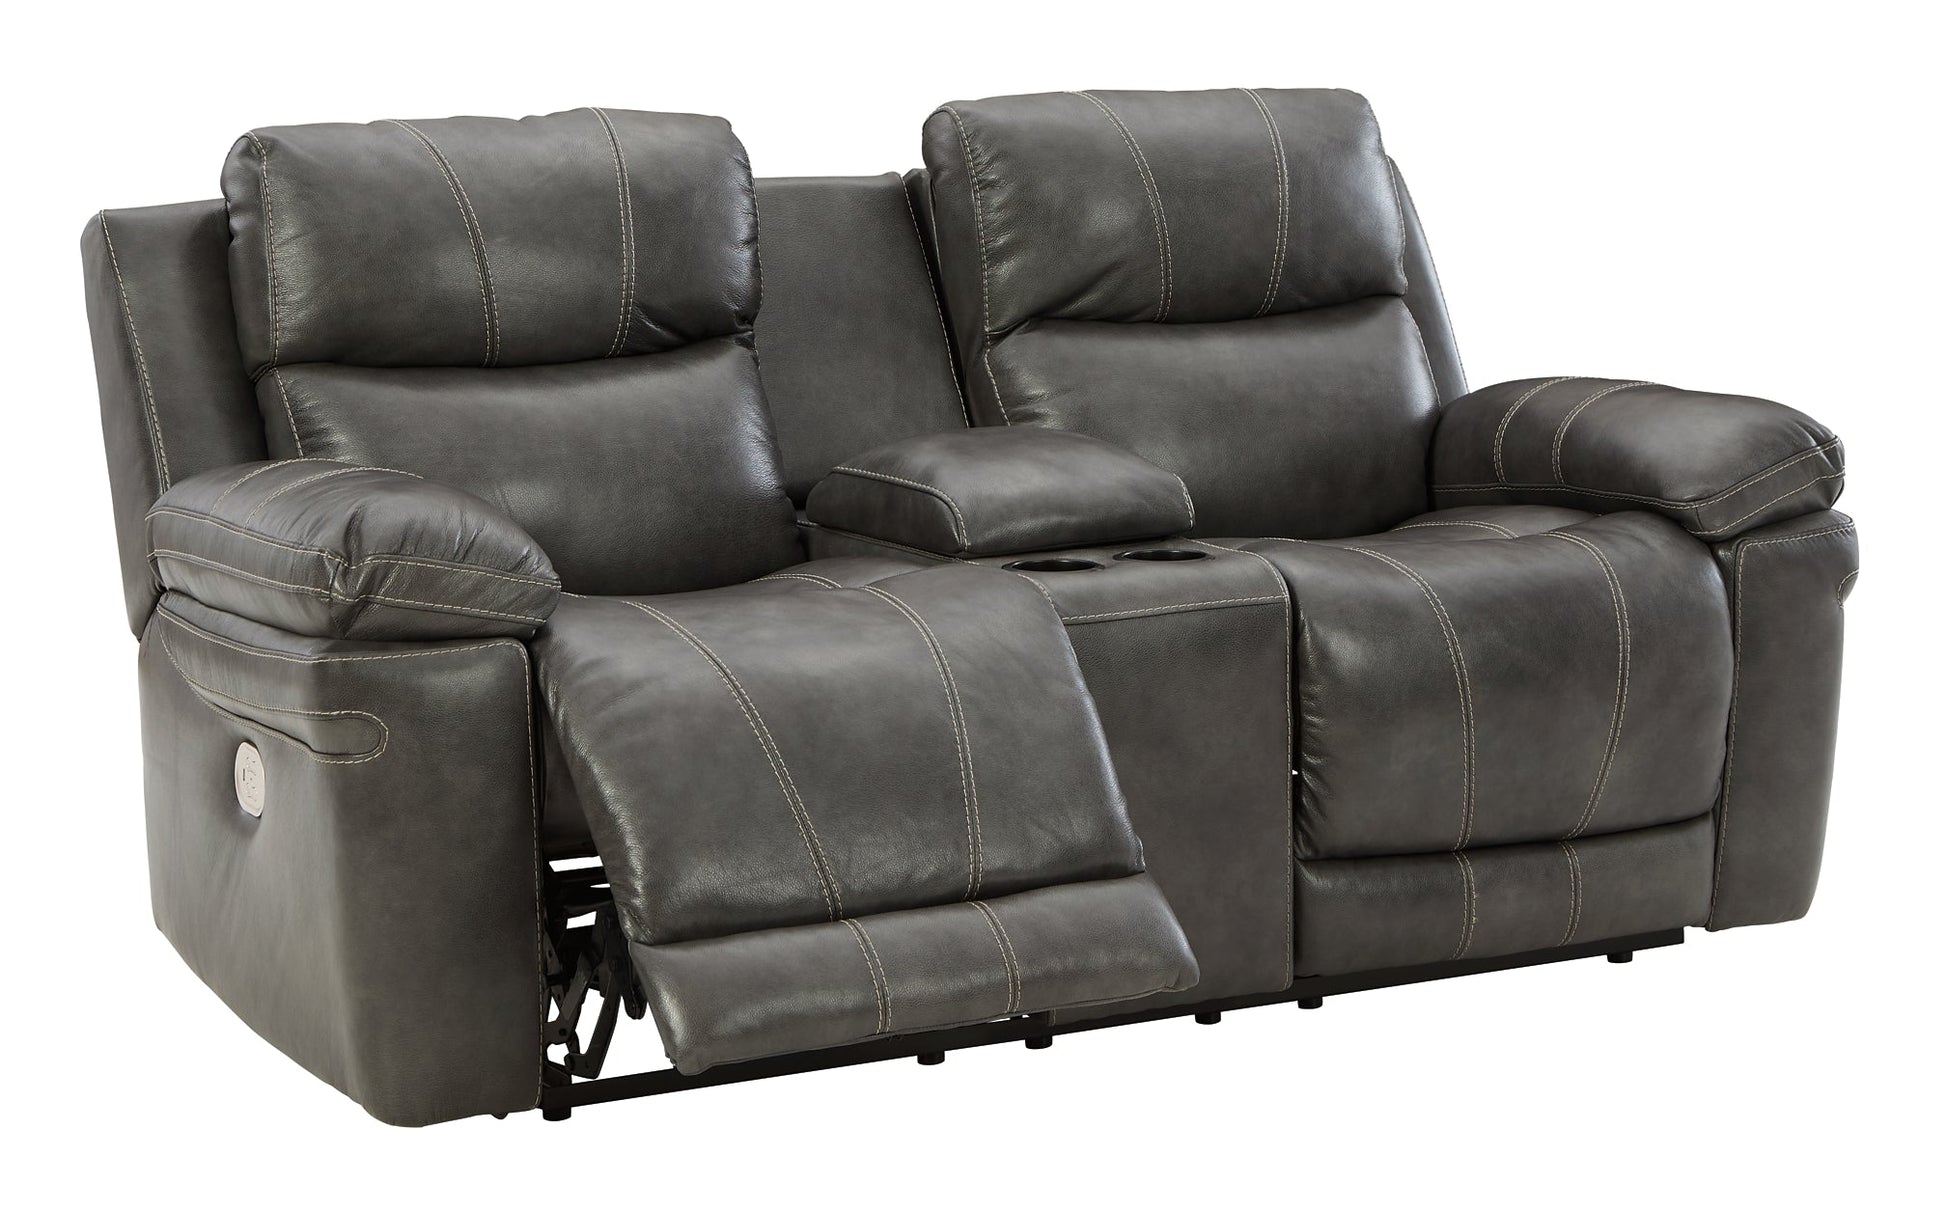 Edmar Sofa, Loveseat and Recliner at Walker Mattress and Furniture Locations in Cedar Park and Belton TX.